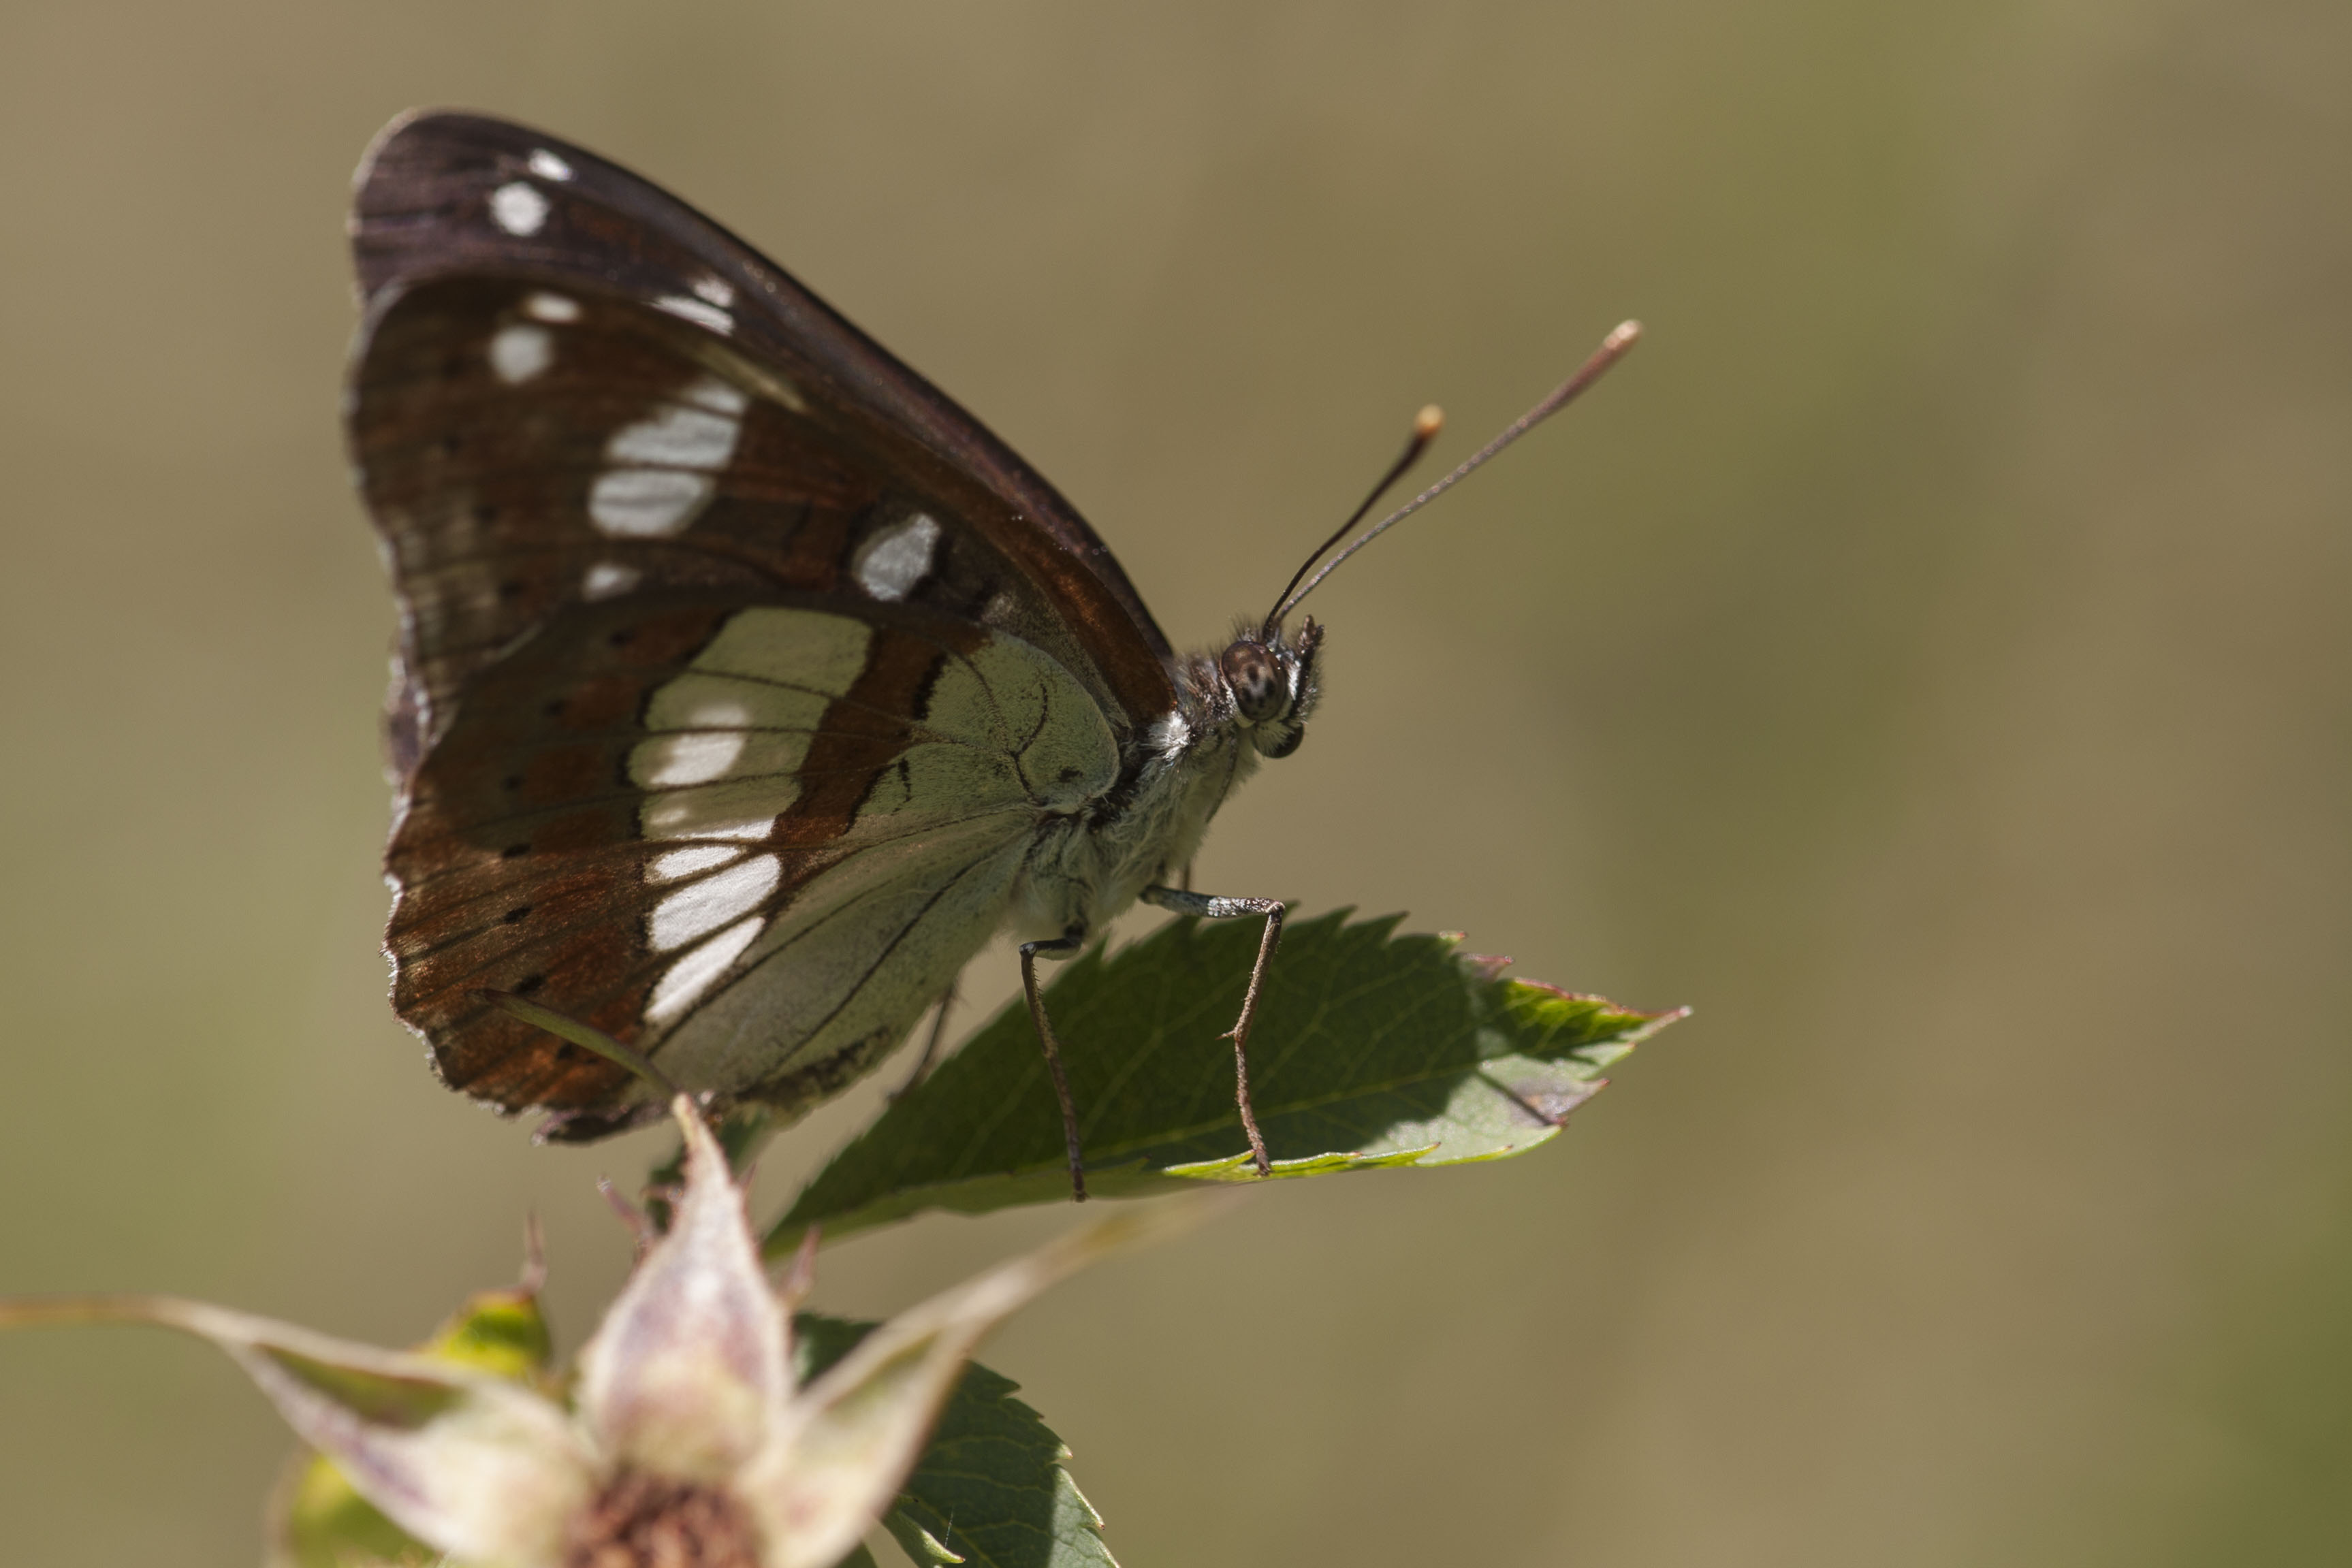 Southern white admiral  - Limenitis reducta